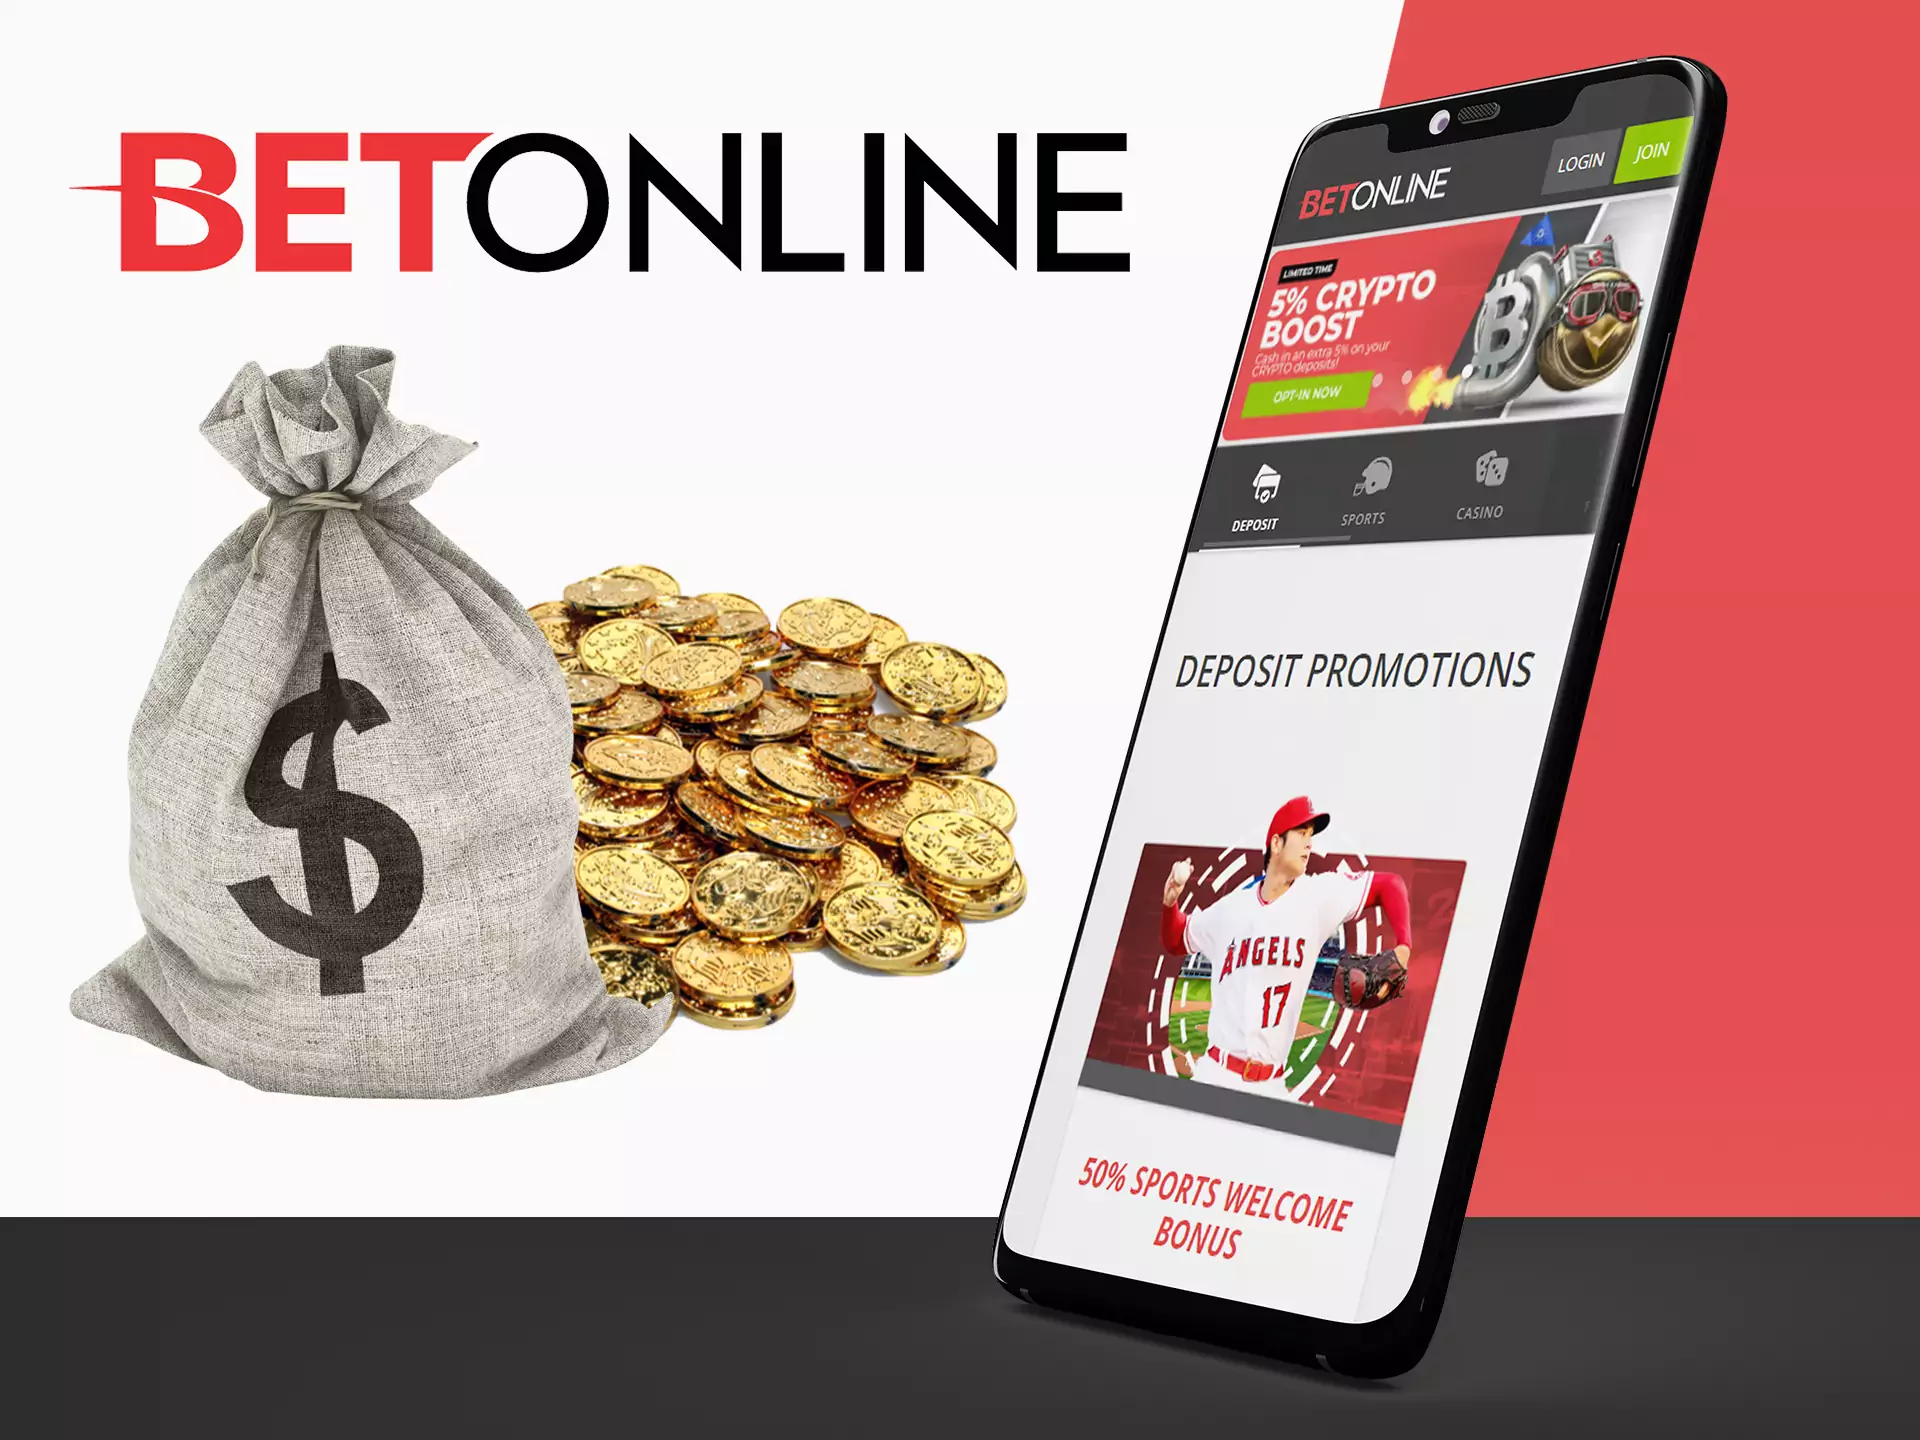 New users of the Betonline app get a welcome bonus.